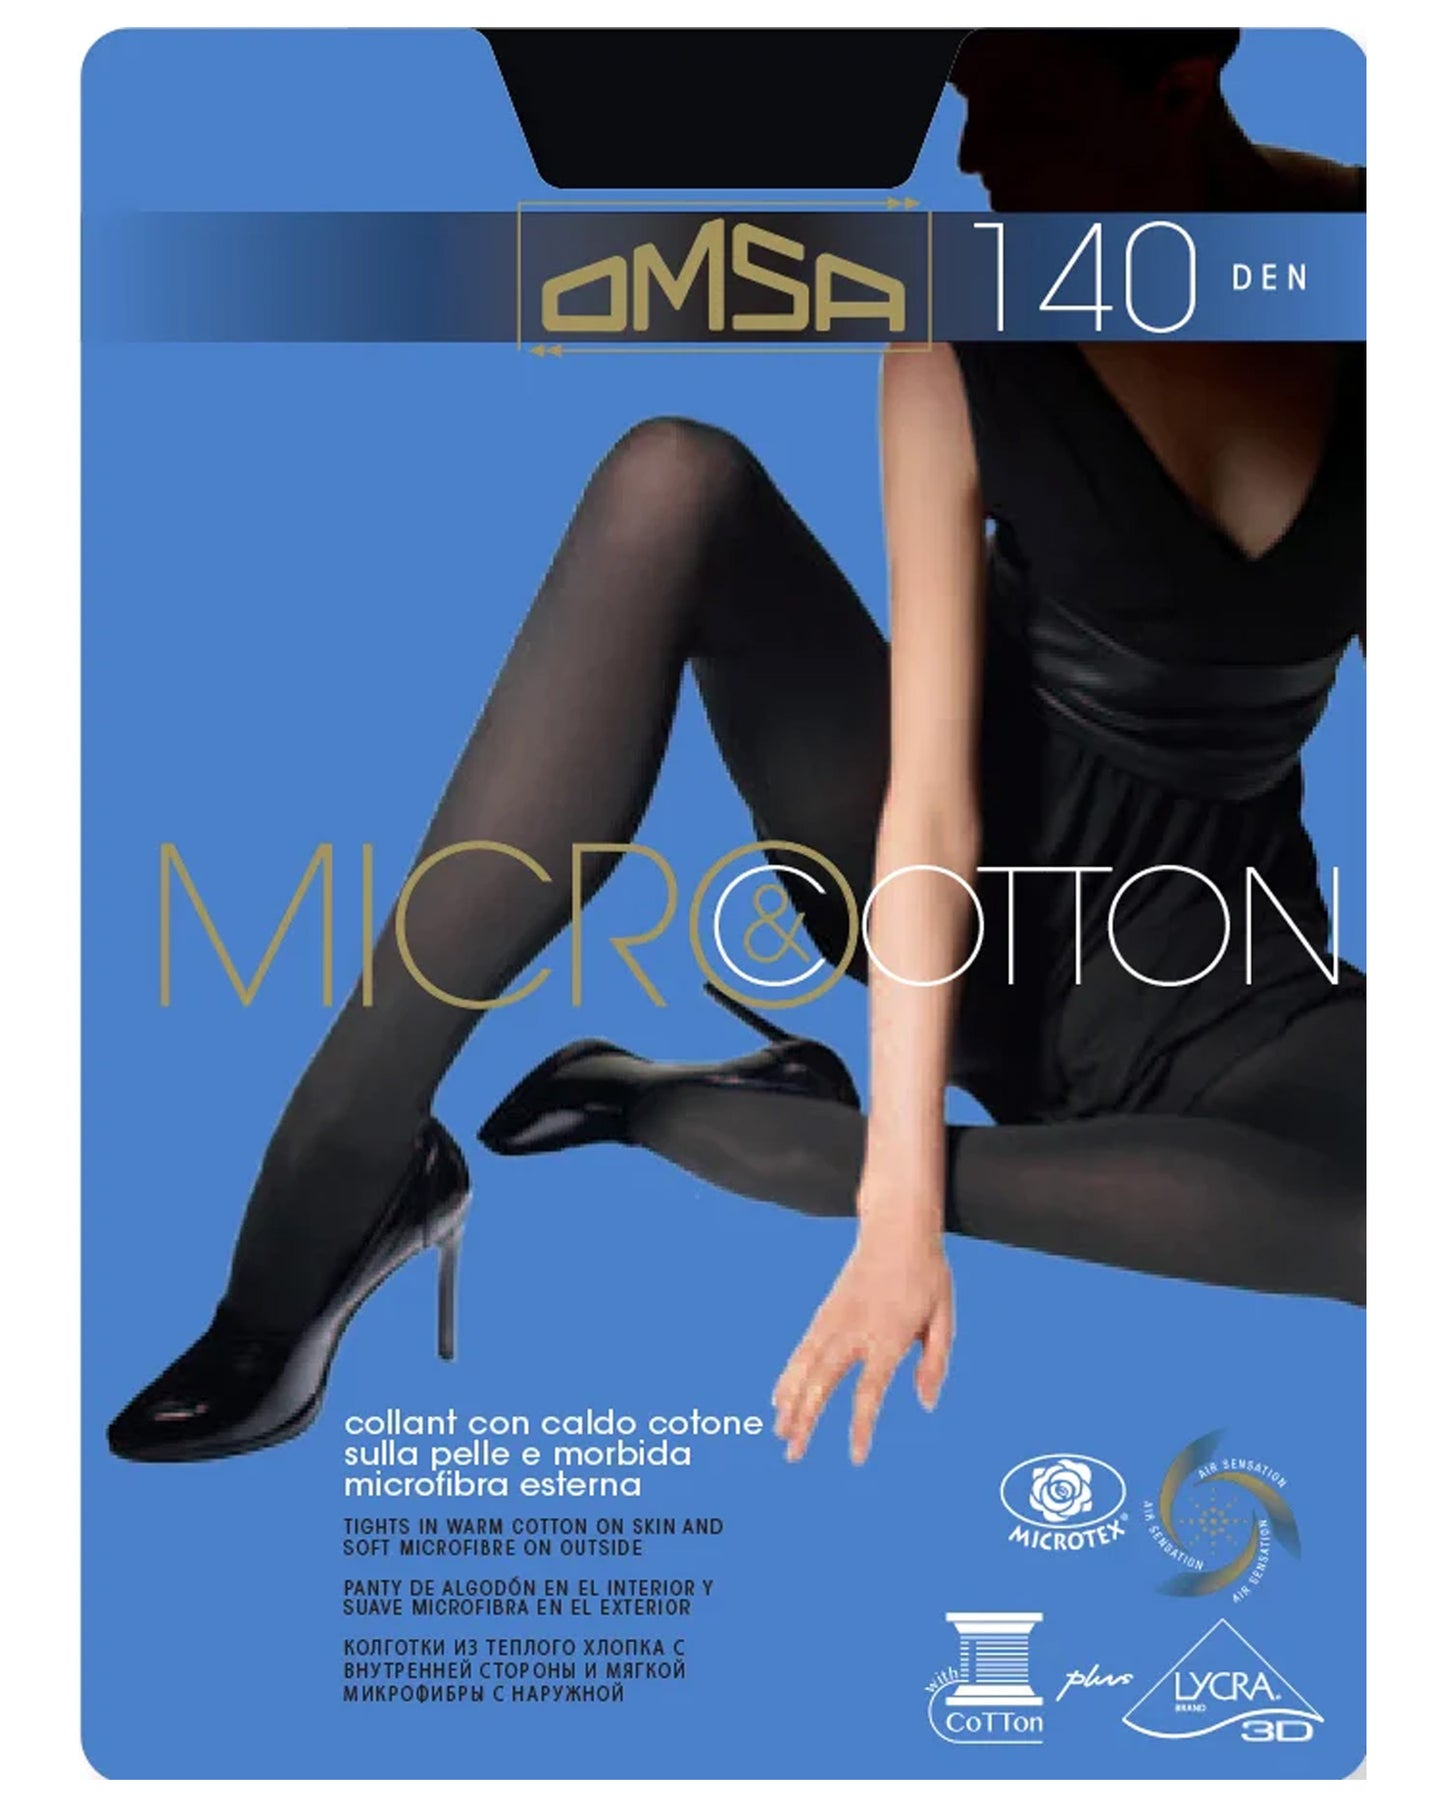 Omsa Micro & Cotton Tights - ultra opaque matte cotton lined winter thermal tights packet.